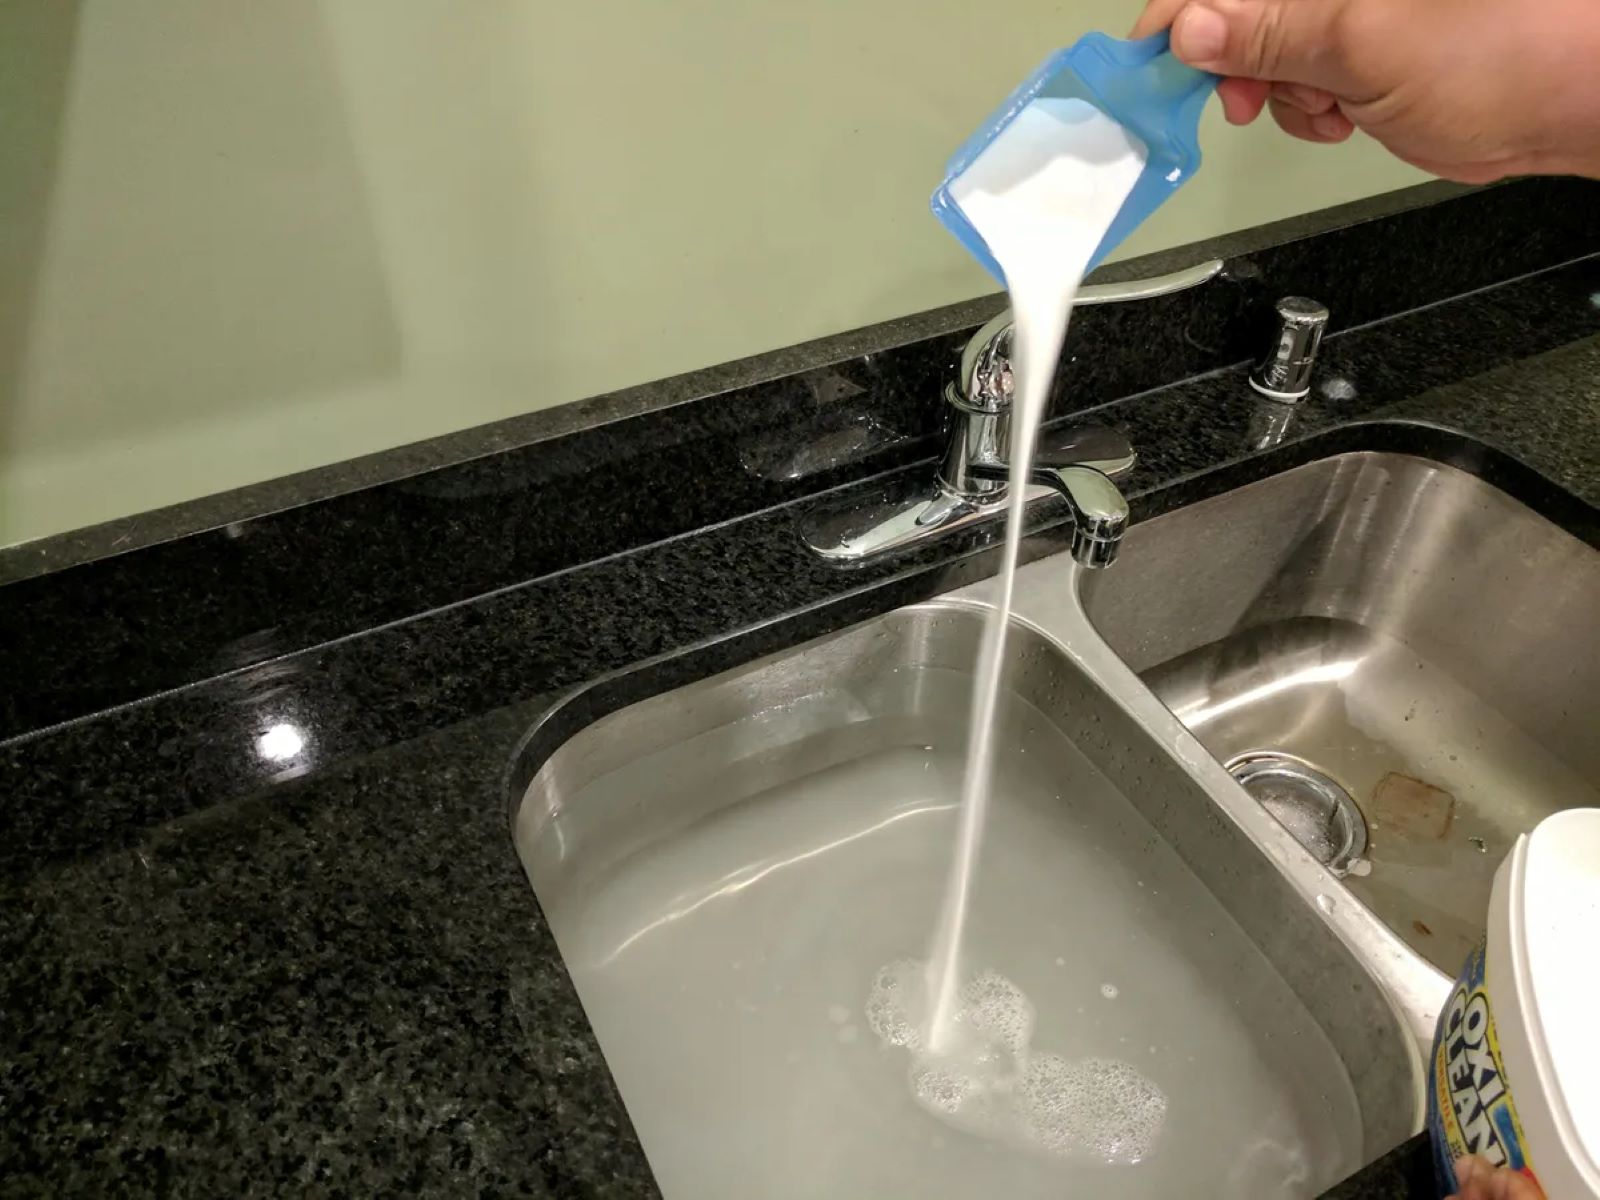 The Nozzle Is Stiff: How To Discharge Deodorizer Into The Sink